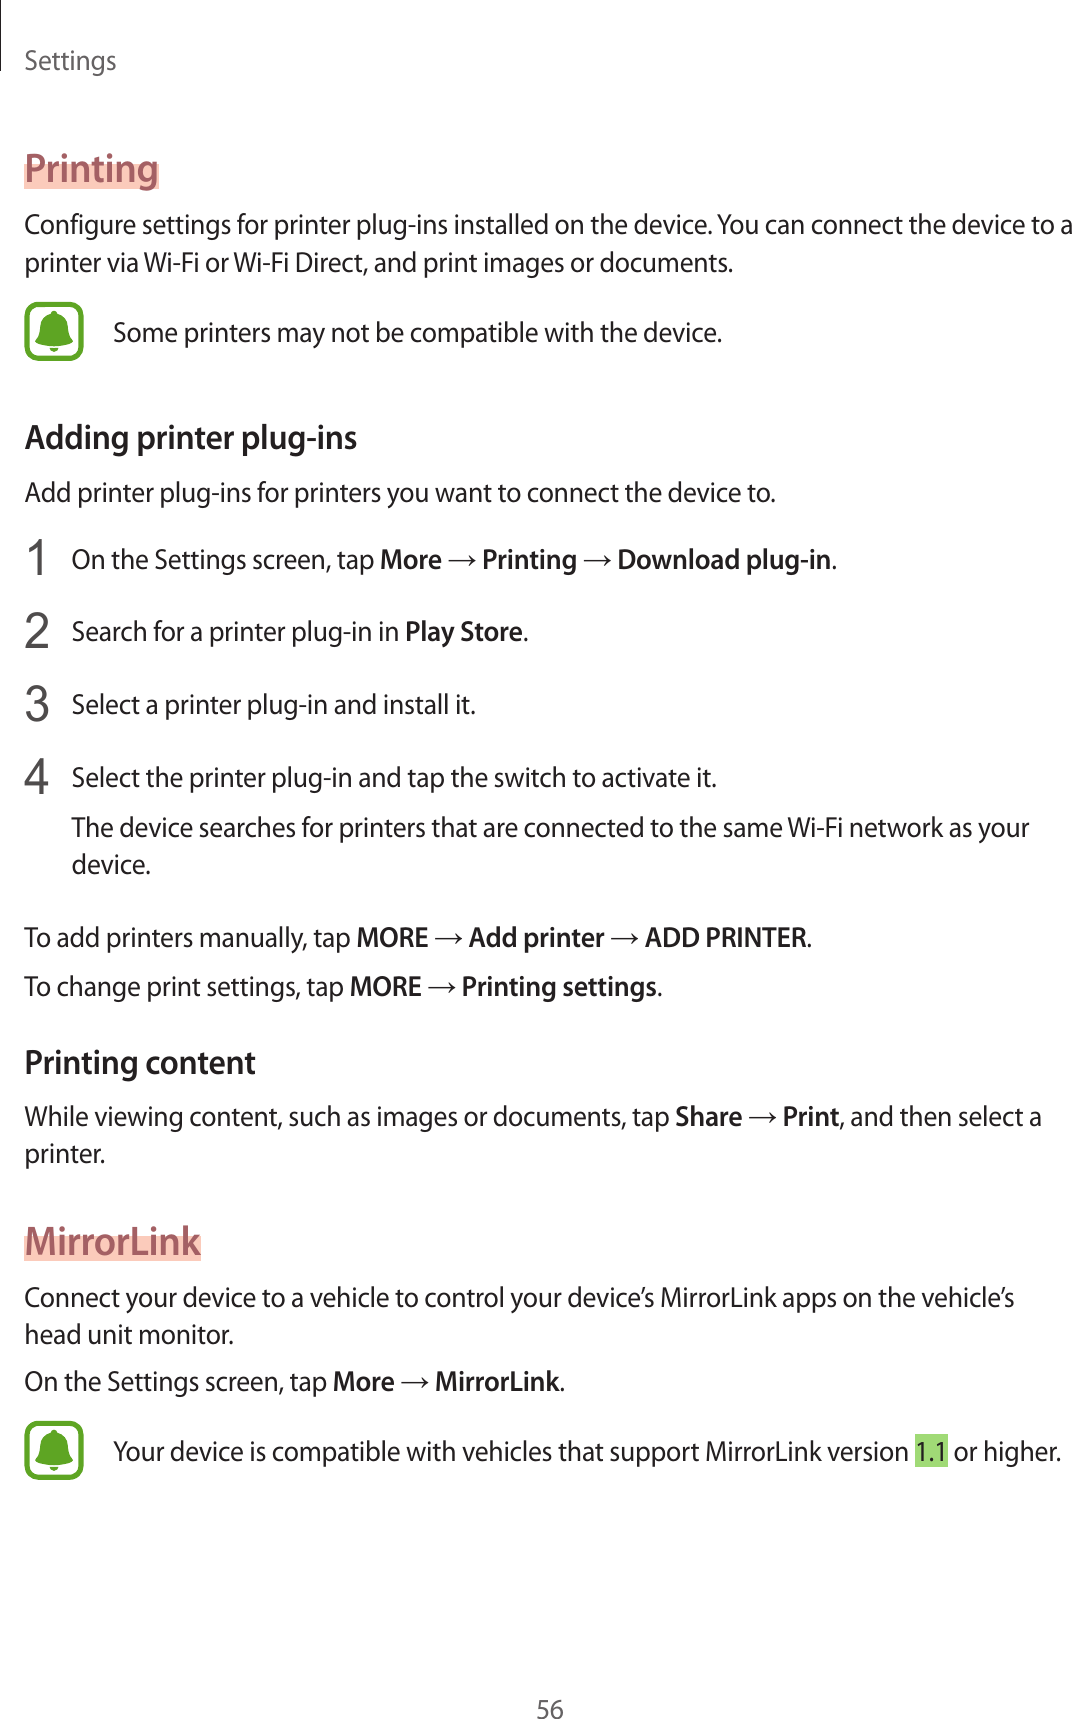 Settings56PrintingConfigur e settings f or print er plug-ins installed on the device. You can connect the device to a printer via Wi-Fi or  Wi-Fi Dir ect, and print images or documents .Some printers may not be compa tible with the device .Adding prin ter plug-insAdd print er plug-ins f or printers y ou w ant t o connect the device to.1  On the Settings screen, tap More → Printing → Download plug-in.2  Search for a print er plug-in in Play St or e.3  Select a printer plug-in and install it.4  Select the printer plug-in and tap the switch t o activate it.The device sear ches f or print ers that ar e c onnected to the same Wi-Fi network as y our device.To add printers manually, tap MORE → Add prin ter → ADD PRINTER.To change print settings, tap MORE → Printing settings.Prin ting c ont entWhile viewing cont ent , such as images or documents , tap Share → Print, and then select a printer.MirrorLinkConnect your device t o a v ehicle to c ontr ol y our devic e’s MirrorLink apps on the vehicle’s head unit monitor.On the Settings screen, tap More → MirrorLink.Your device is compatible with vehicles that support MirrorLink v ersion 1.1 or higher.